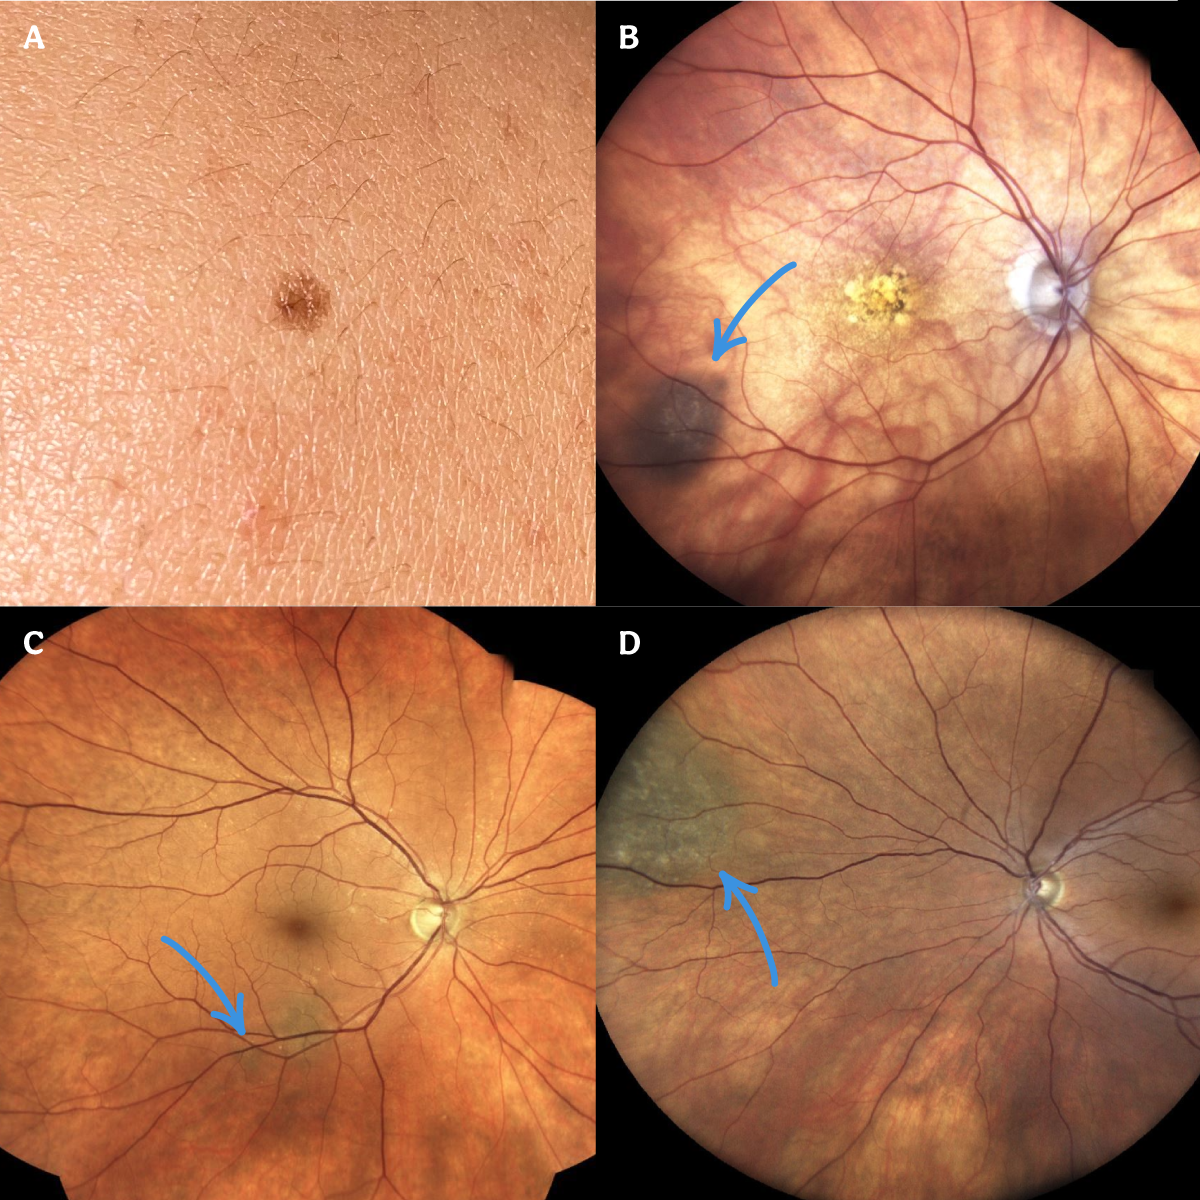 https://covalentcareers3.s3.amazonaws.com/media/original_images/The-Ultimate-Guide-to-Diagnosing-a-Choroidal-Nevus_Images_Choroidal-Nevus.png